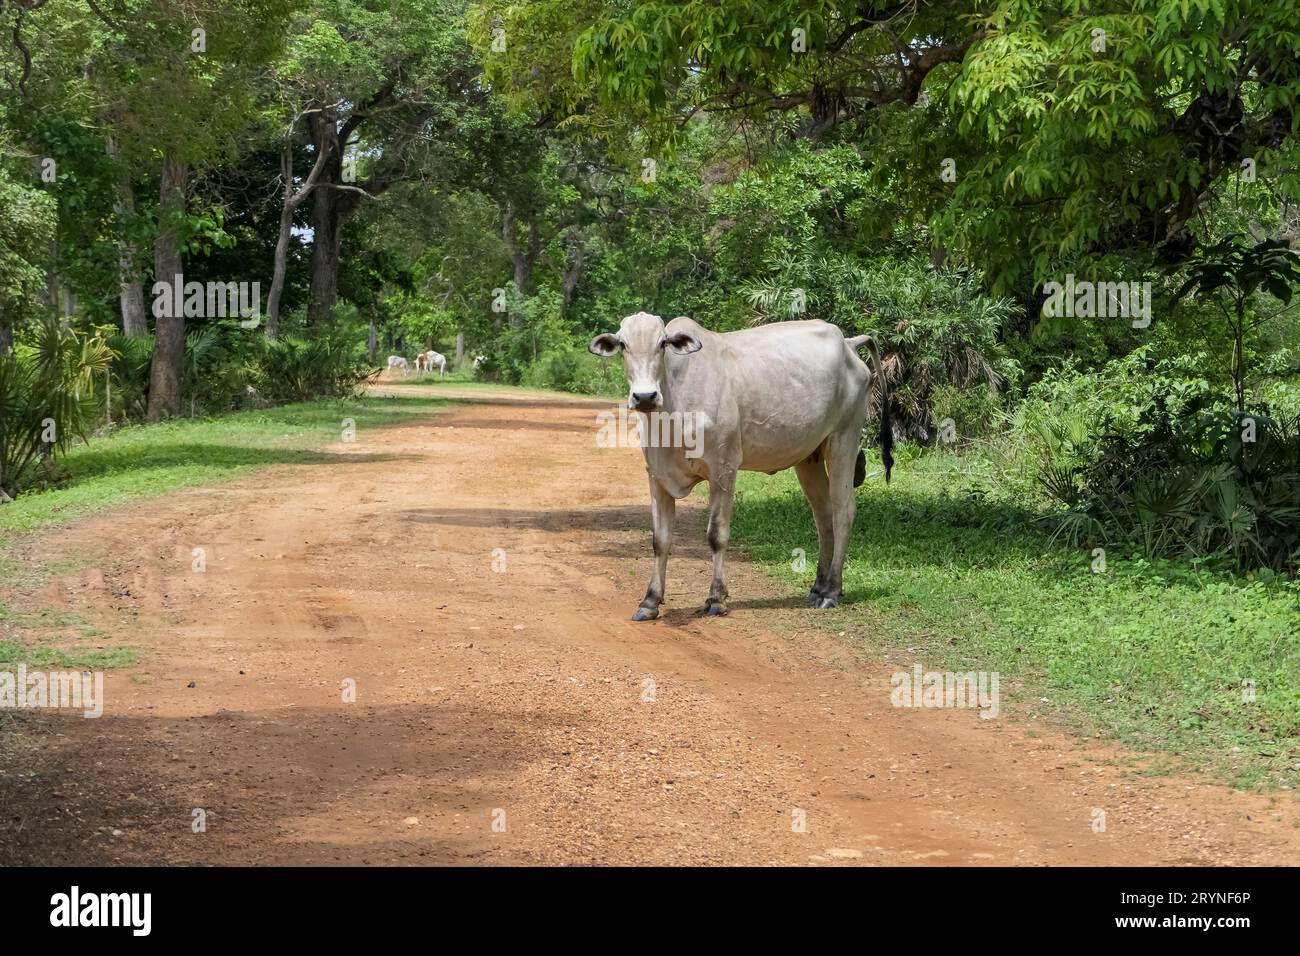 Typical white Pantanal cow standing a dirt road, trees in background, facing camera, Pantanal Wetlan Stock Photo